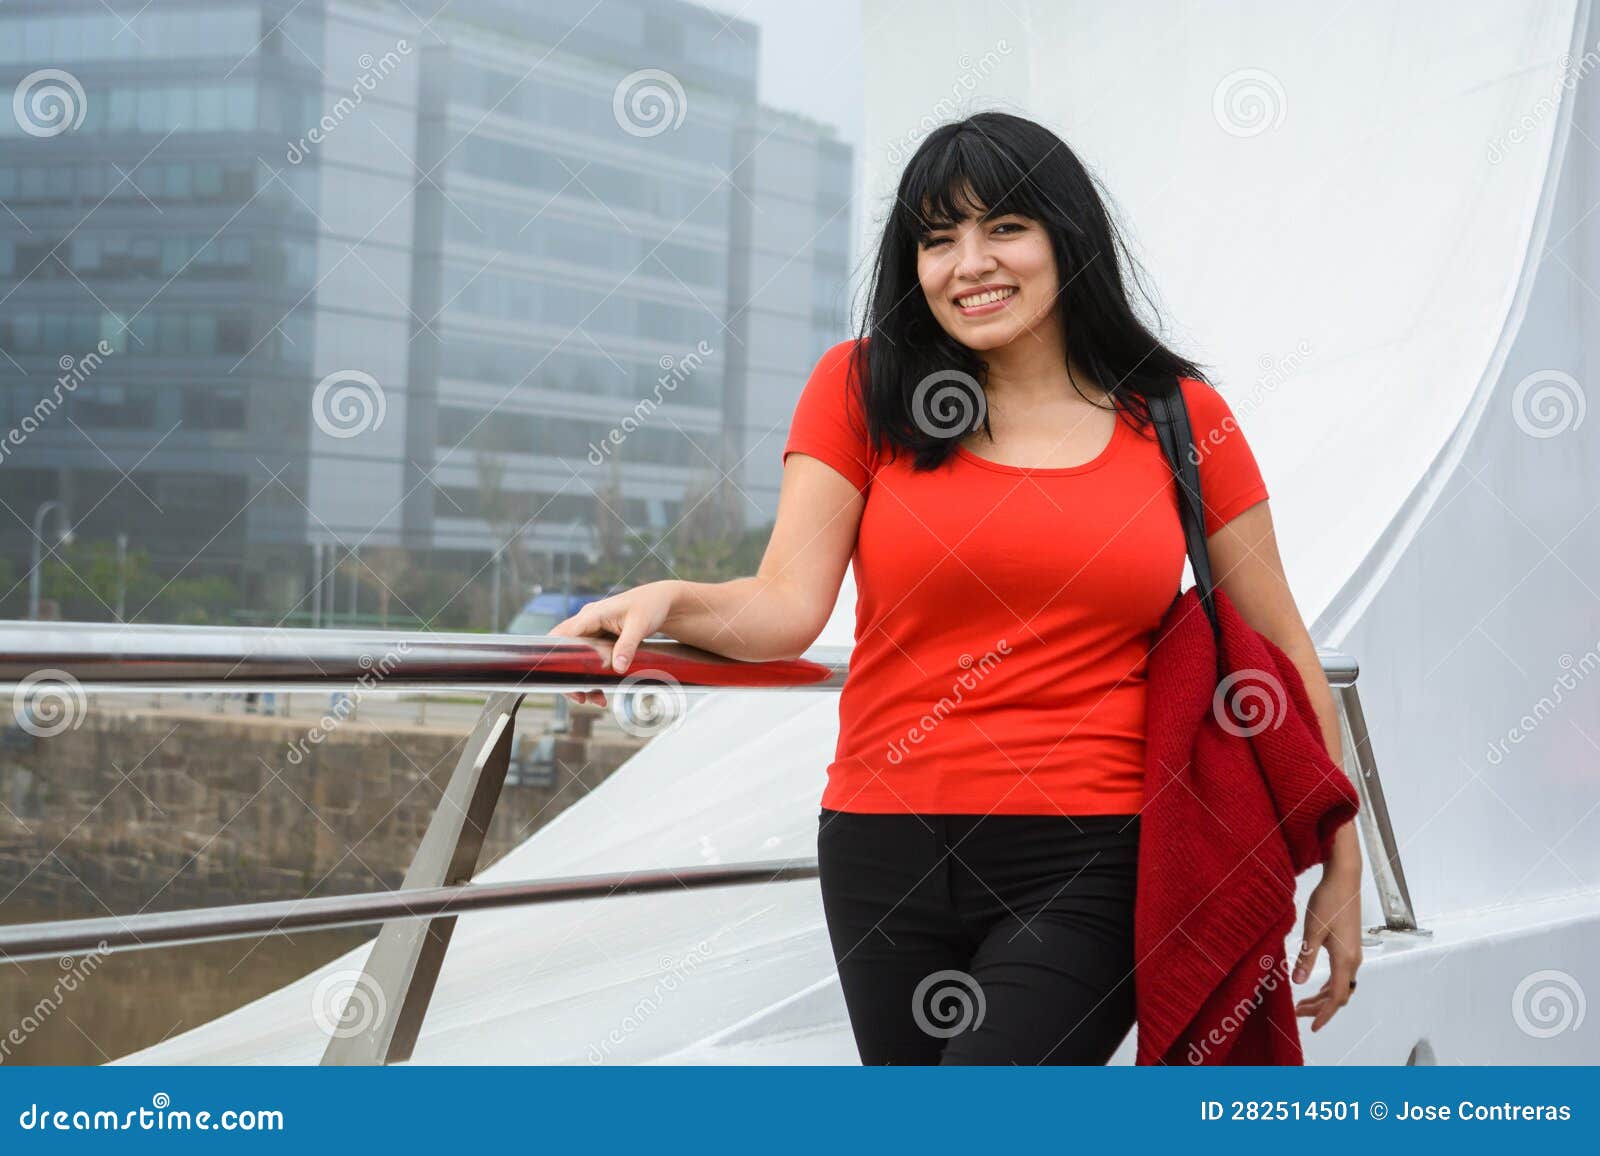 young venezuelan woman smiling looking at the camera standing on the puente de la mujer in buenos aires